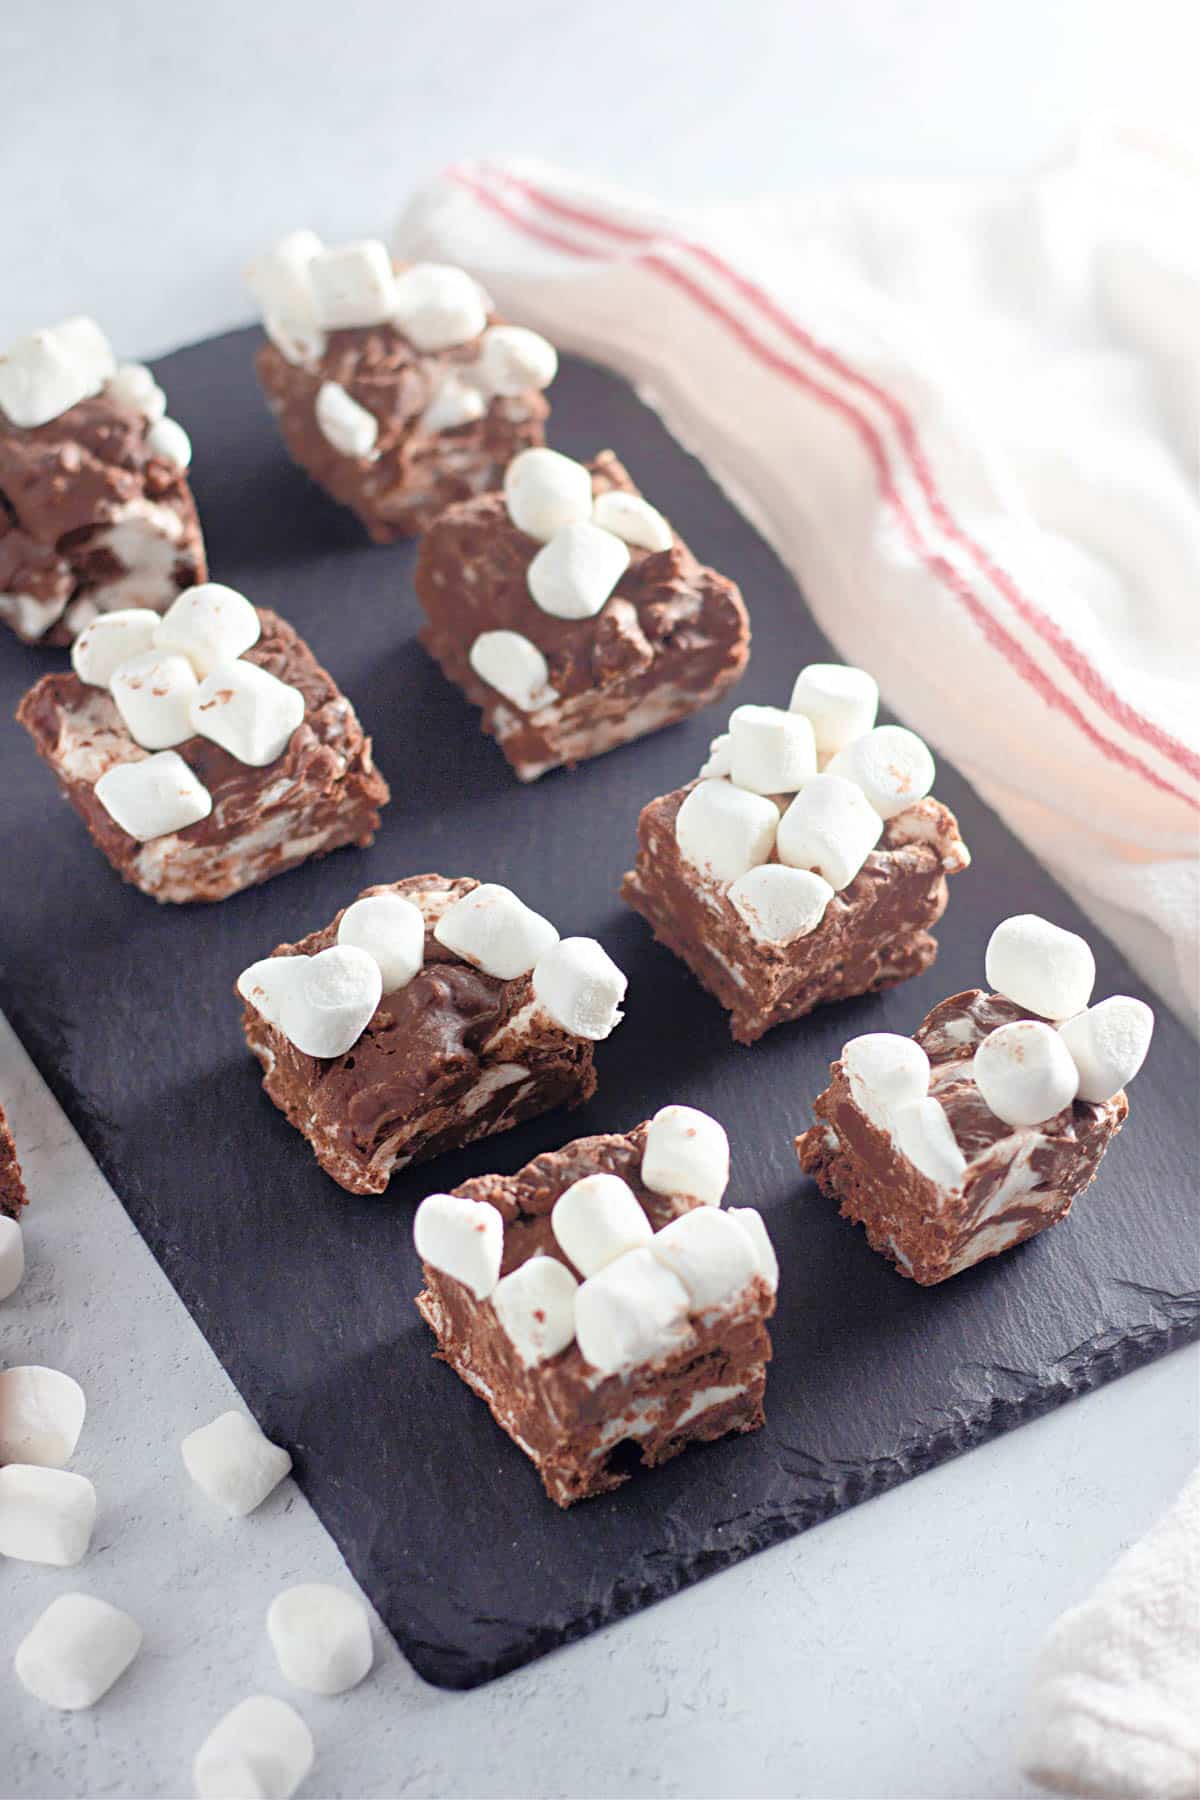 Squares of rocky road candy on black slate.